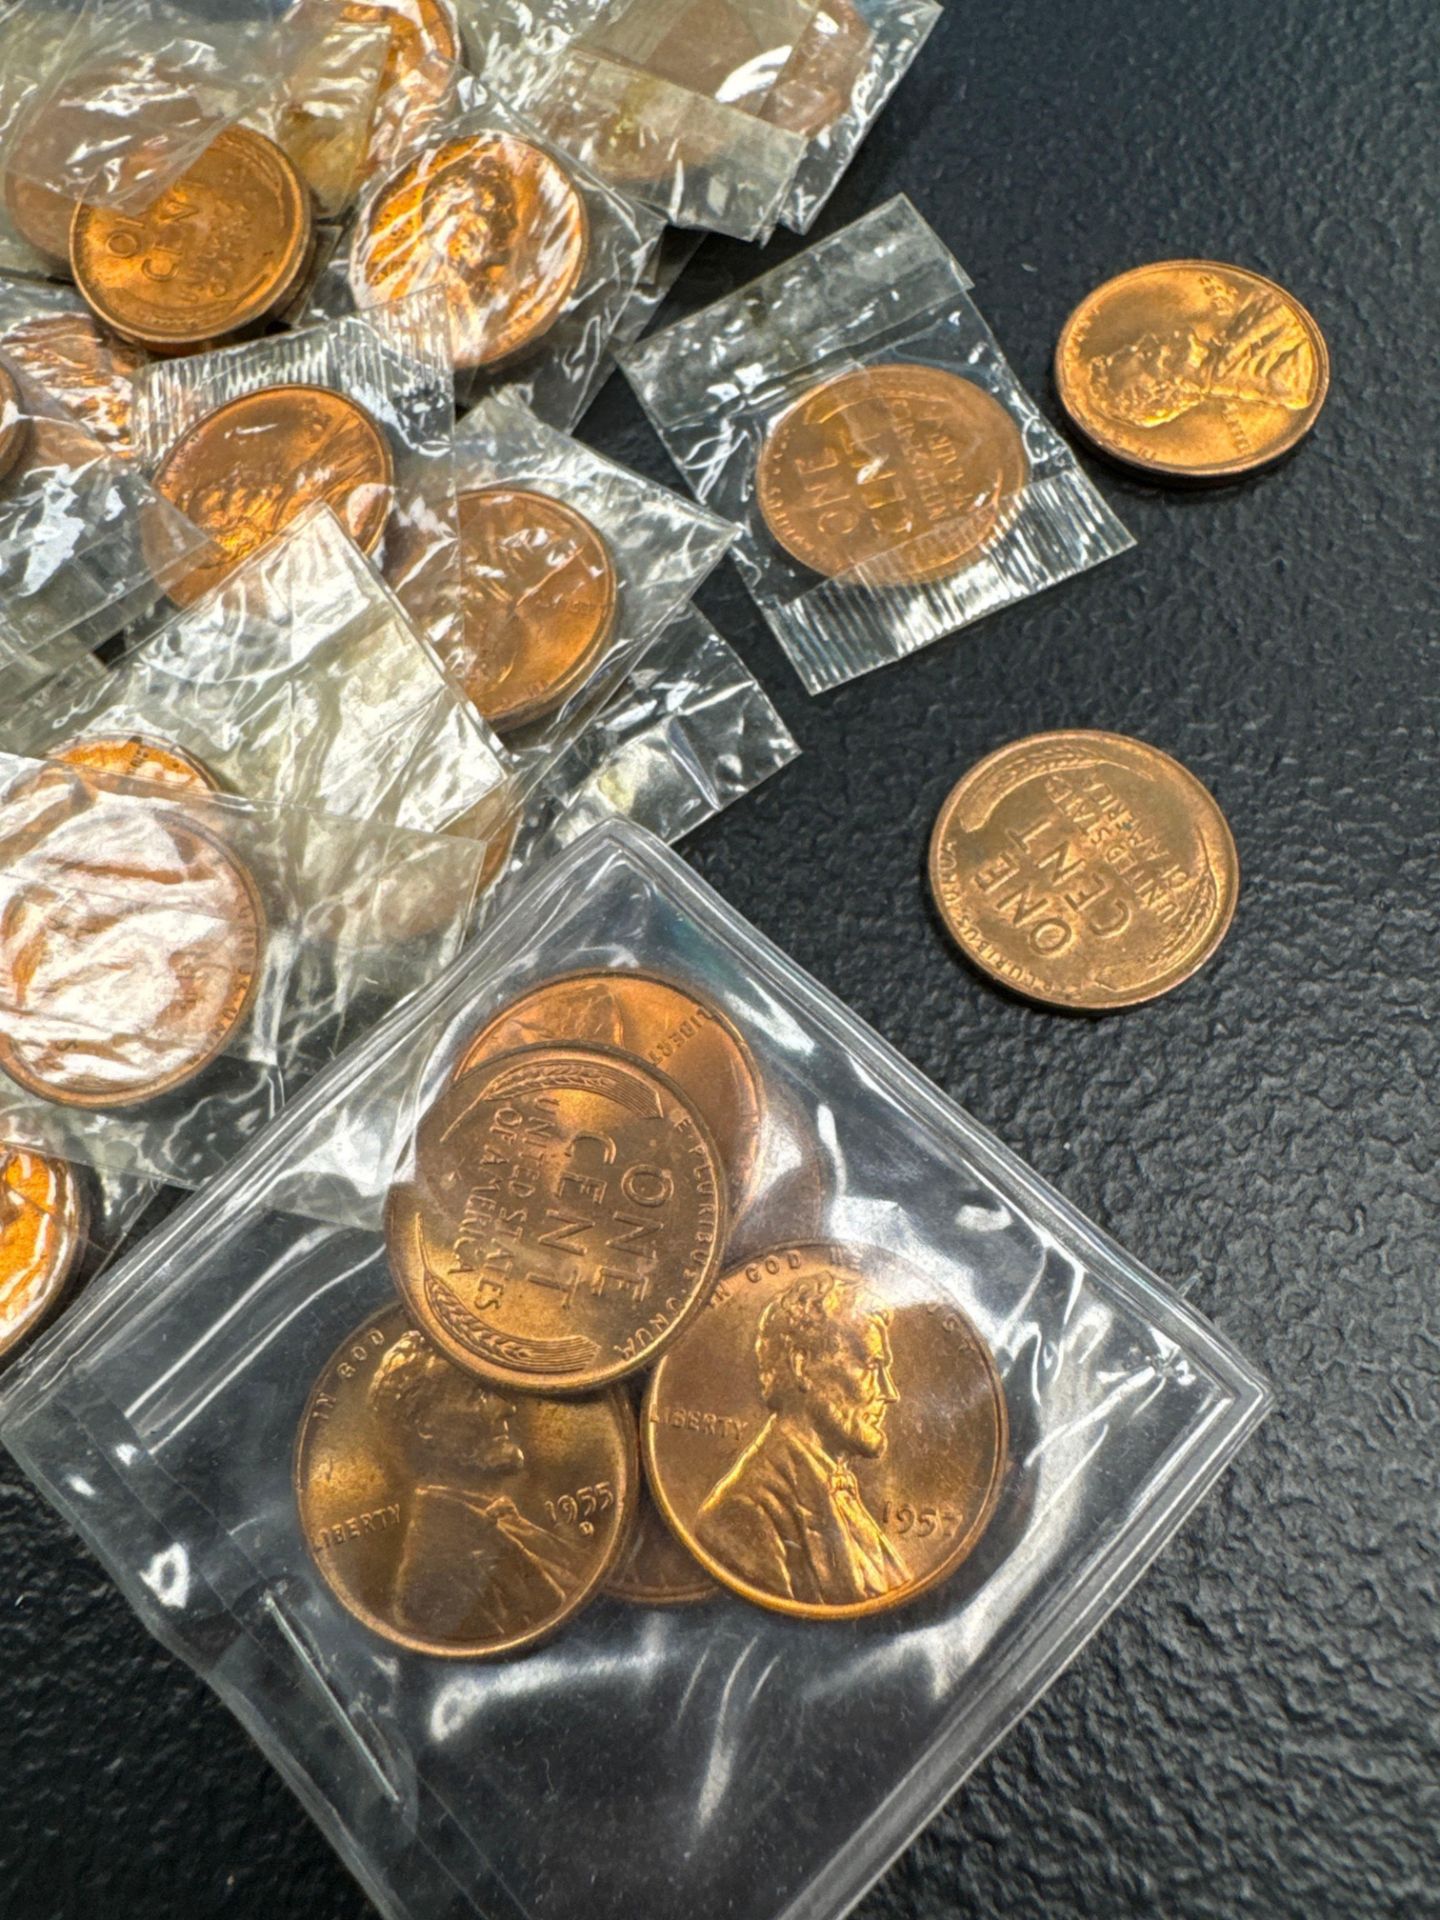 58 UNC Wheat Pennies - Image 2 of 4